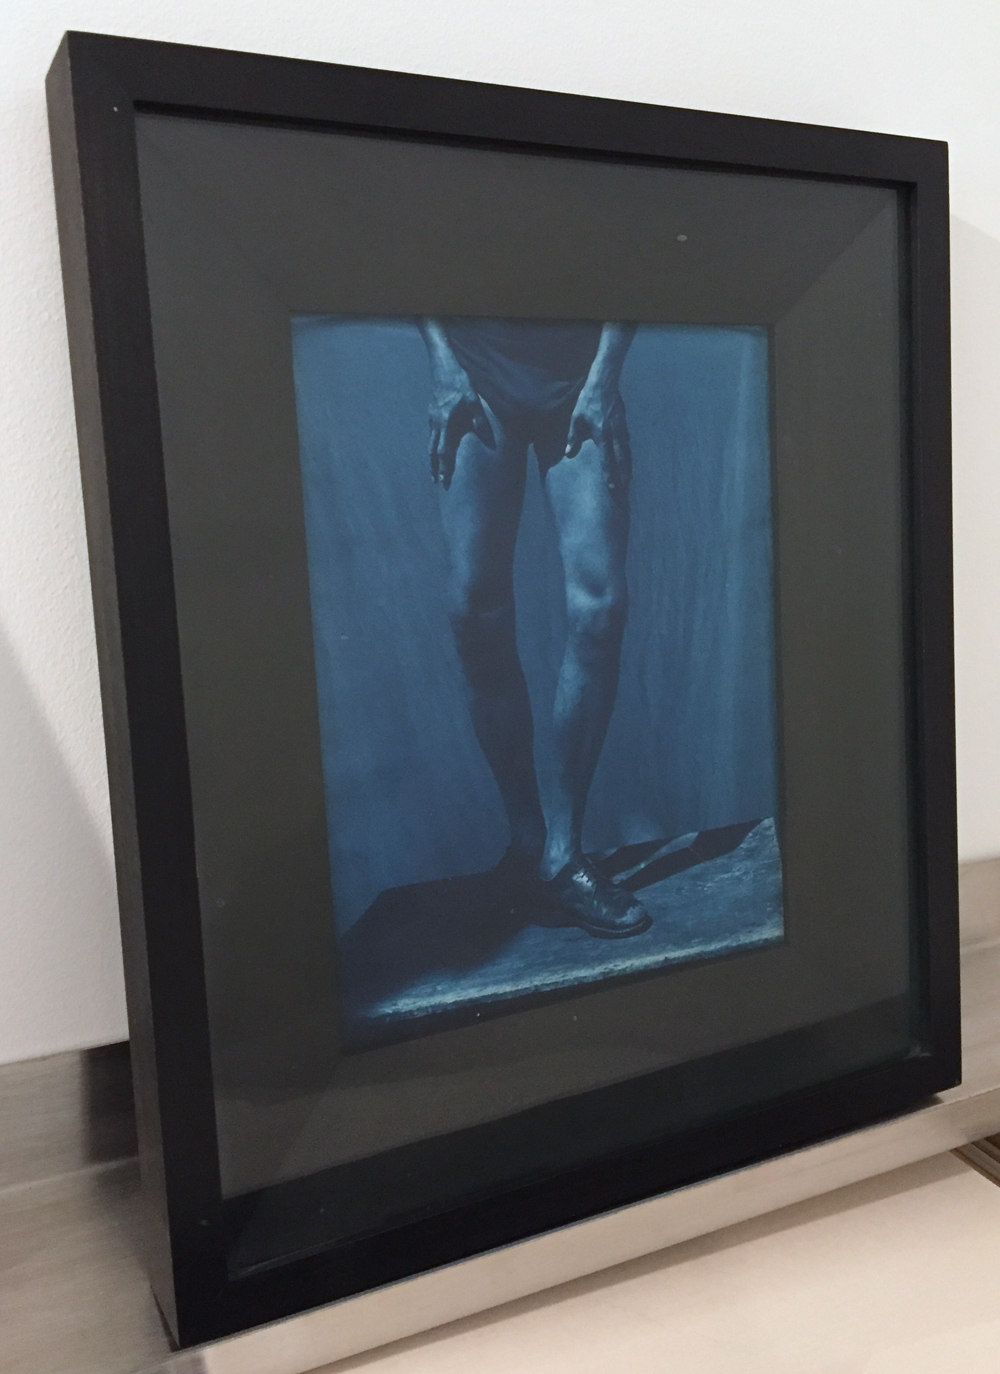 John Dugdale, Support and Locomotion, 1996, cyanotype, 10 x 8 inches, edition of 10, framed, $5500.